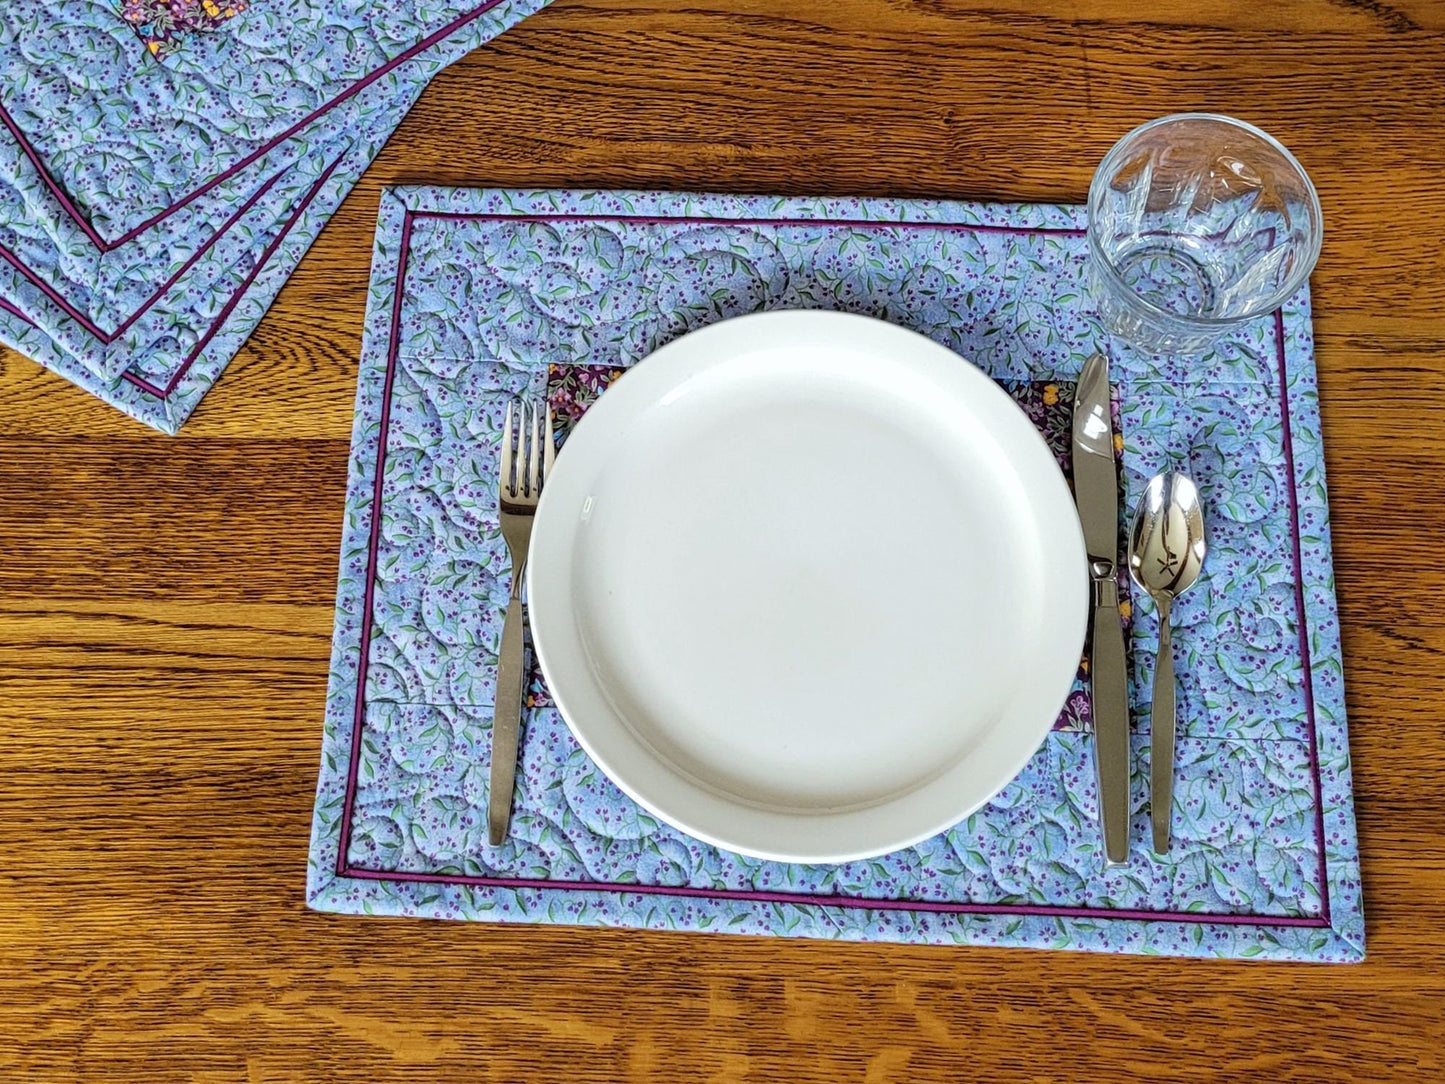 quilted placemats hold full place setting